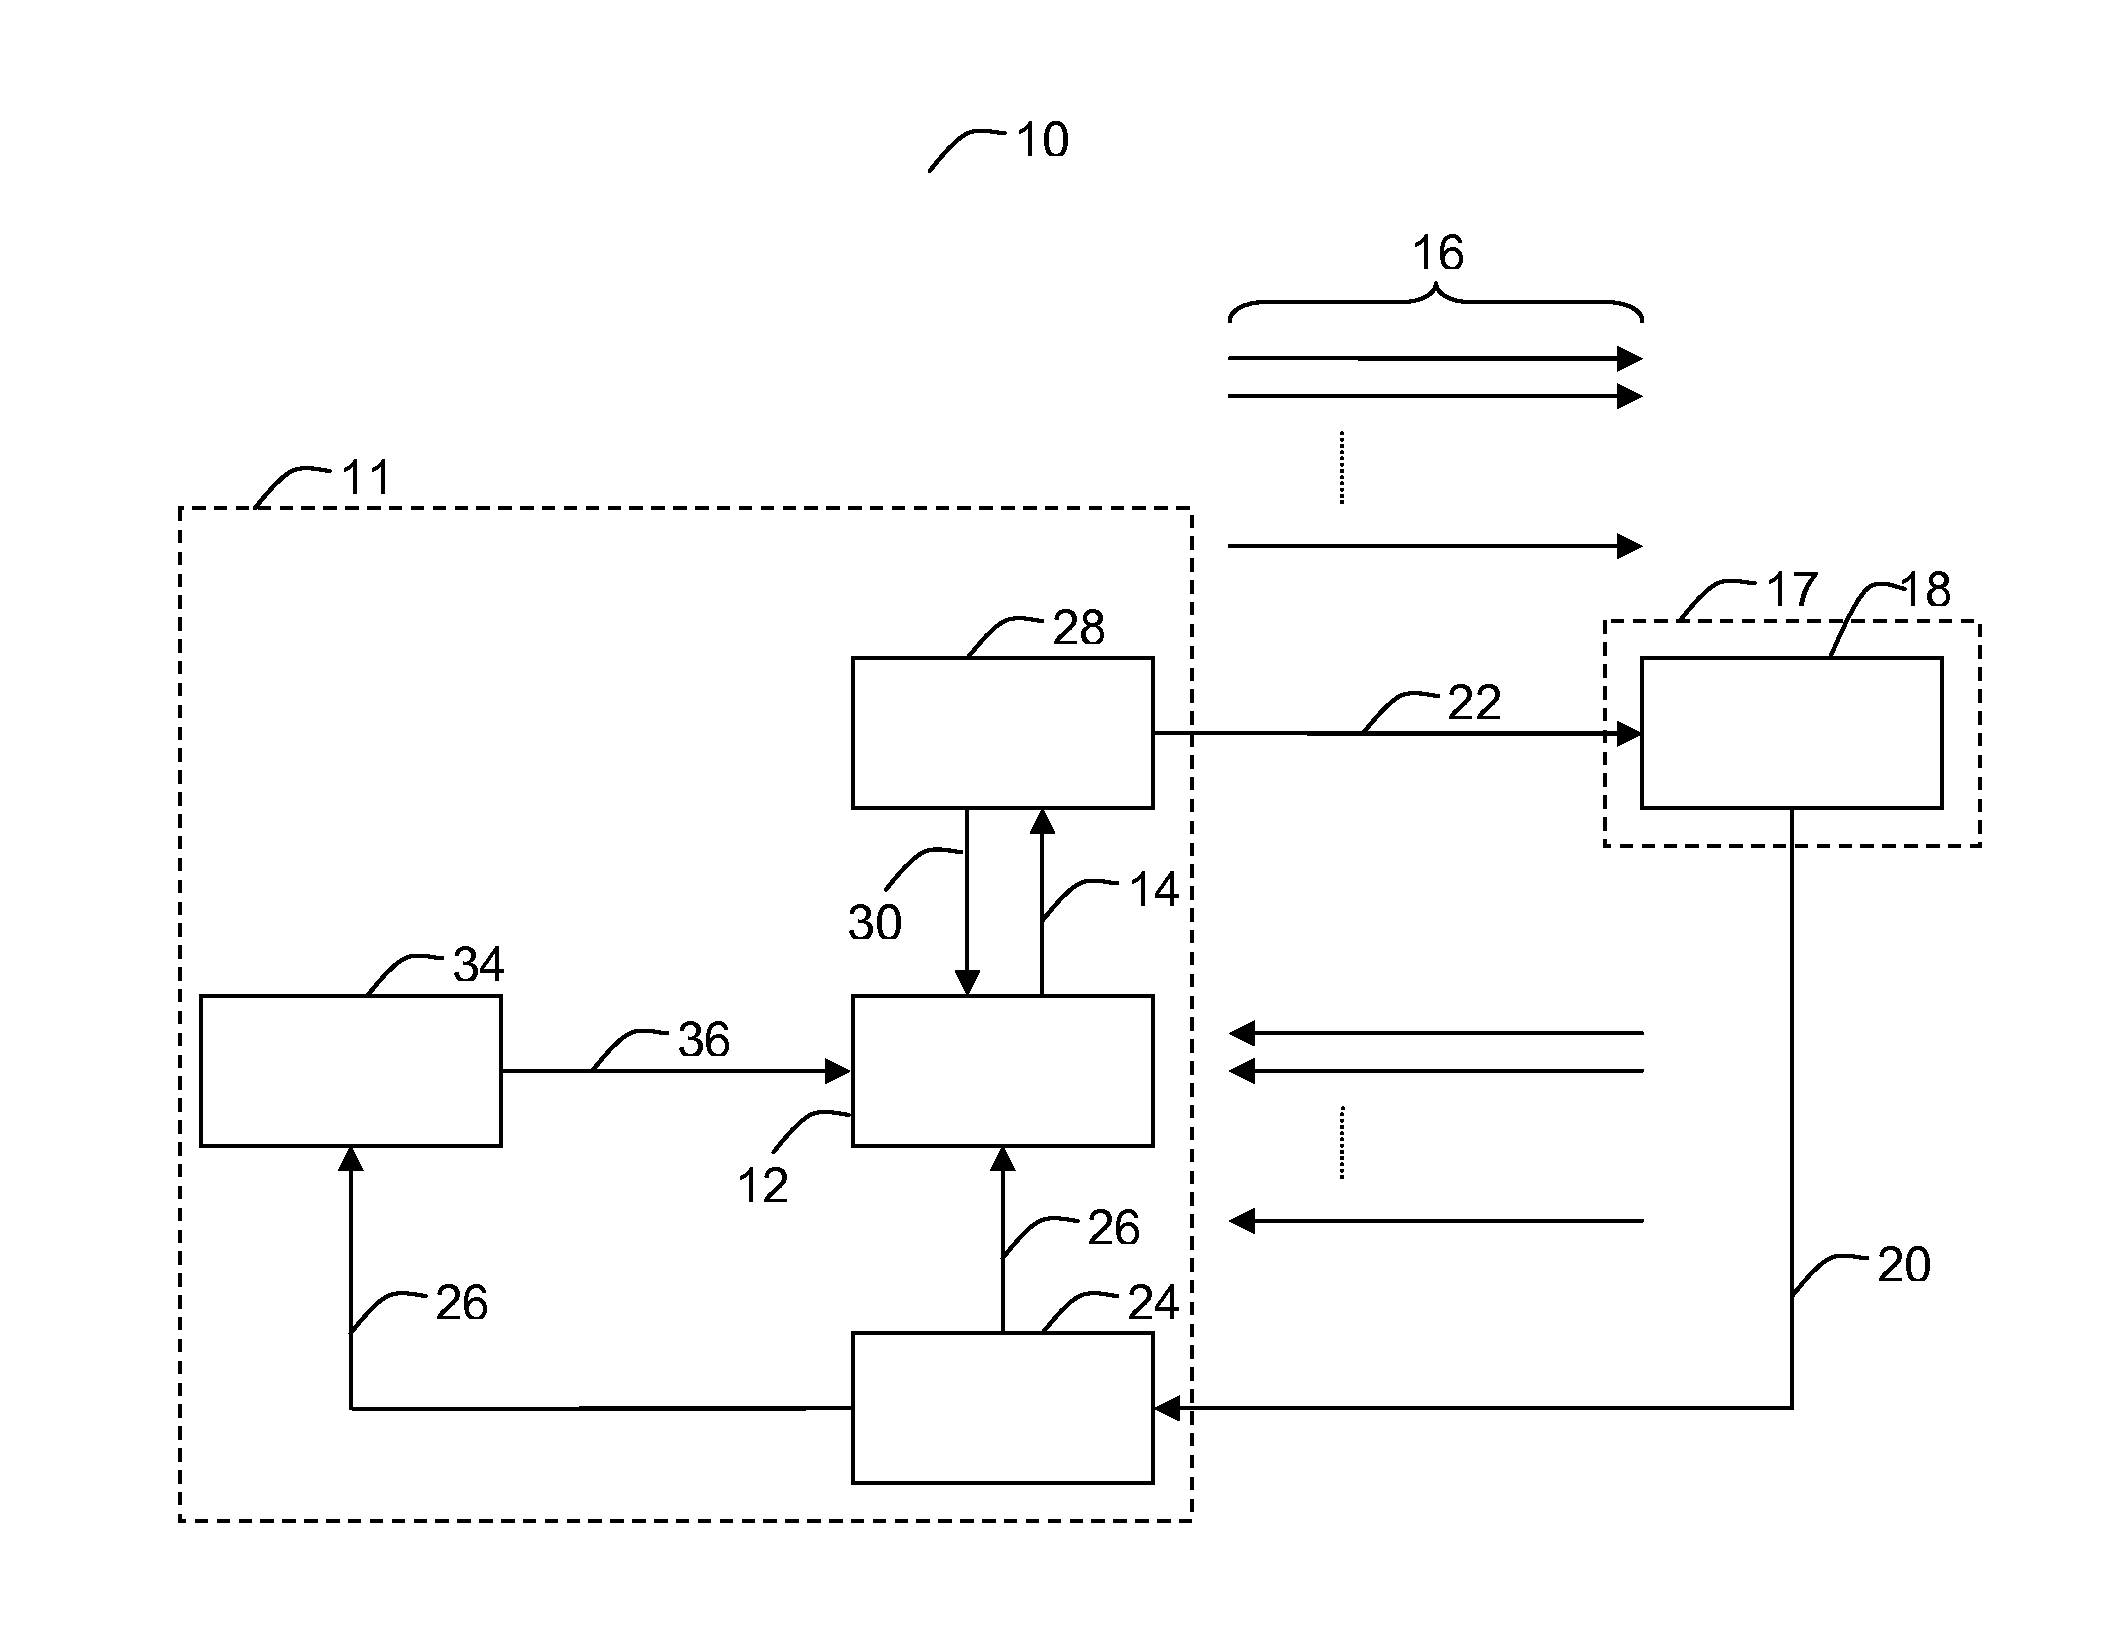 Channel condition dependent scheduling